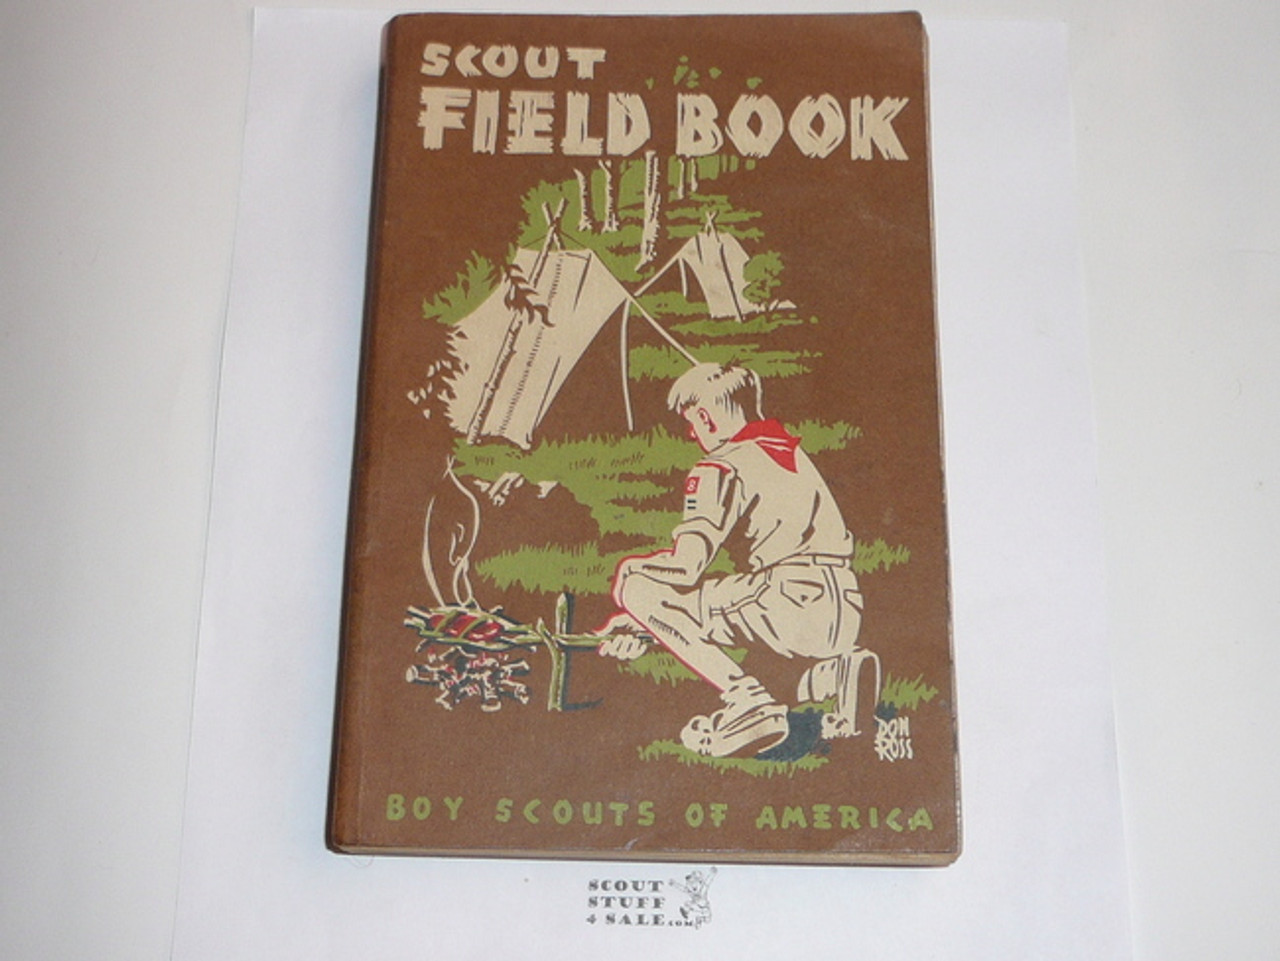 1951 Boy Scout Field Book, First Edition, Sixth Printing, Lightly used condition